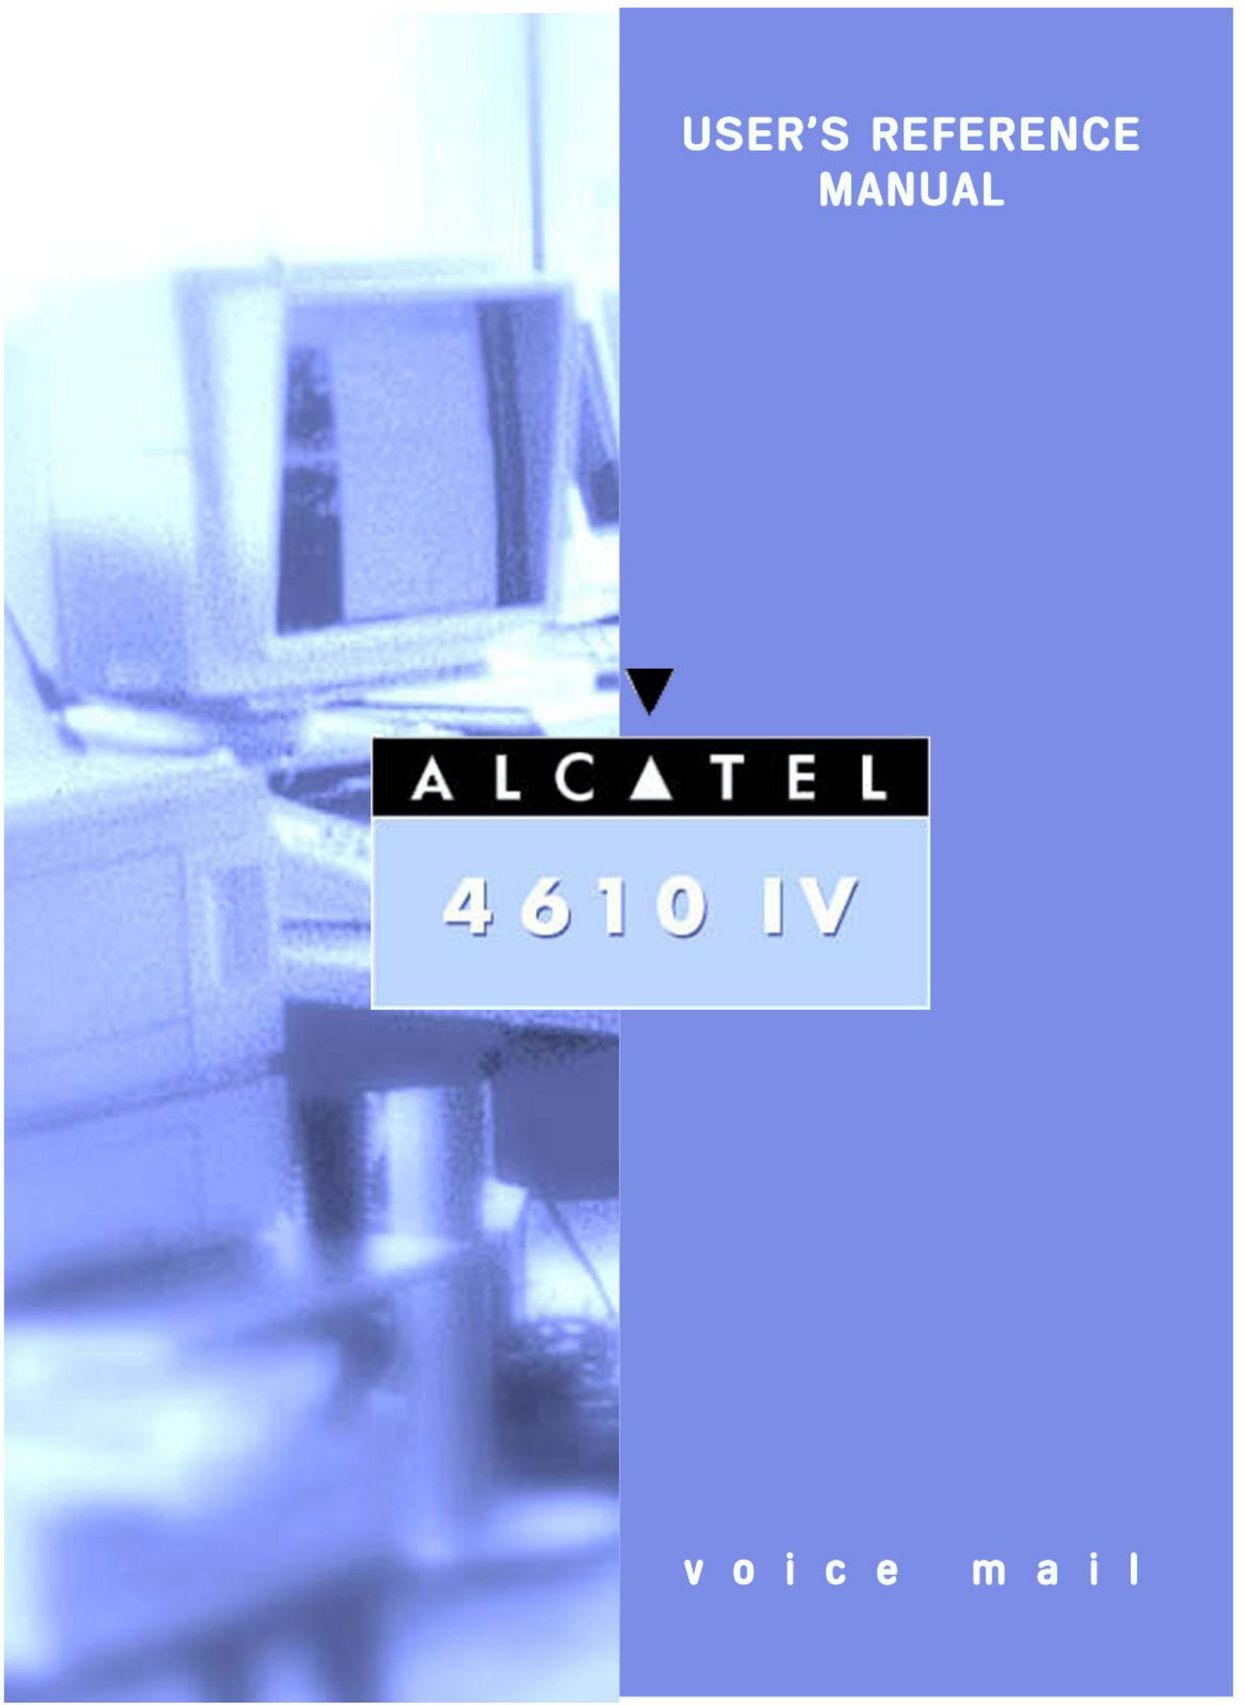 Alcatel-Lucent 4610 IV Answering Machine User Manual